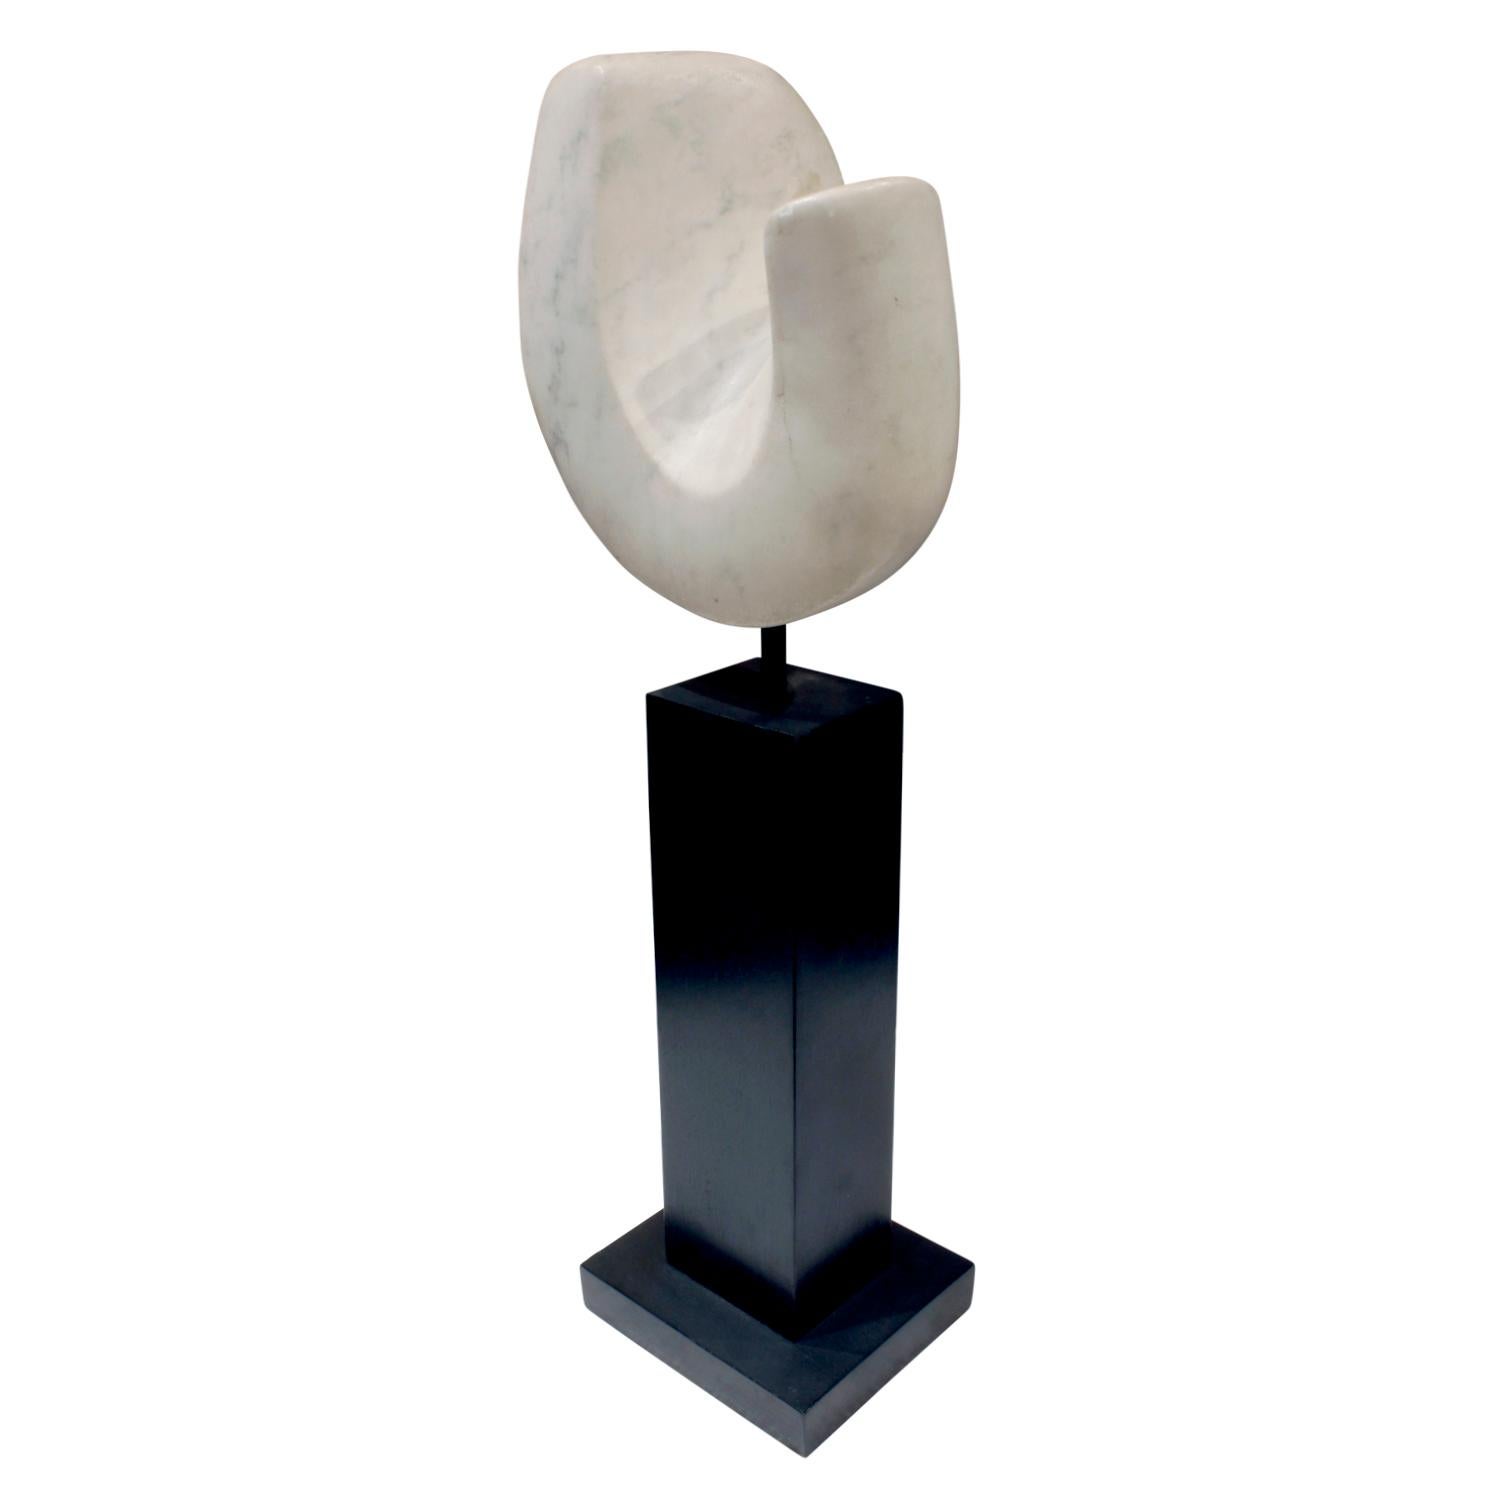 Hand-carved “Tenero” sculpture in Vermont marble mounted on an ebonized wooden pedestal base by Naomi Feinberg, American, 1960s.

Naomi Feinberg was a New York based sculptor who worked primarily in stone. She began sculpting in the 1940s and